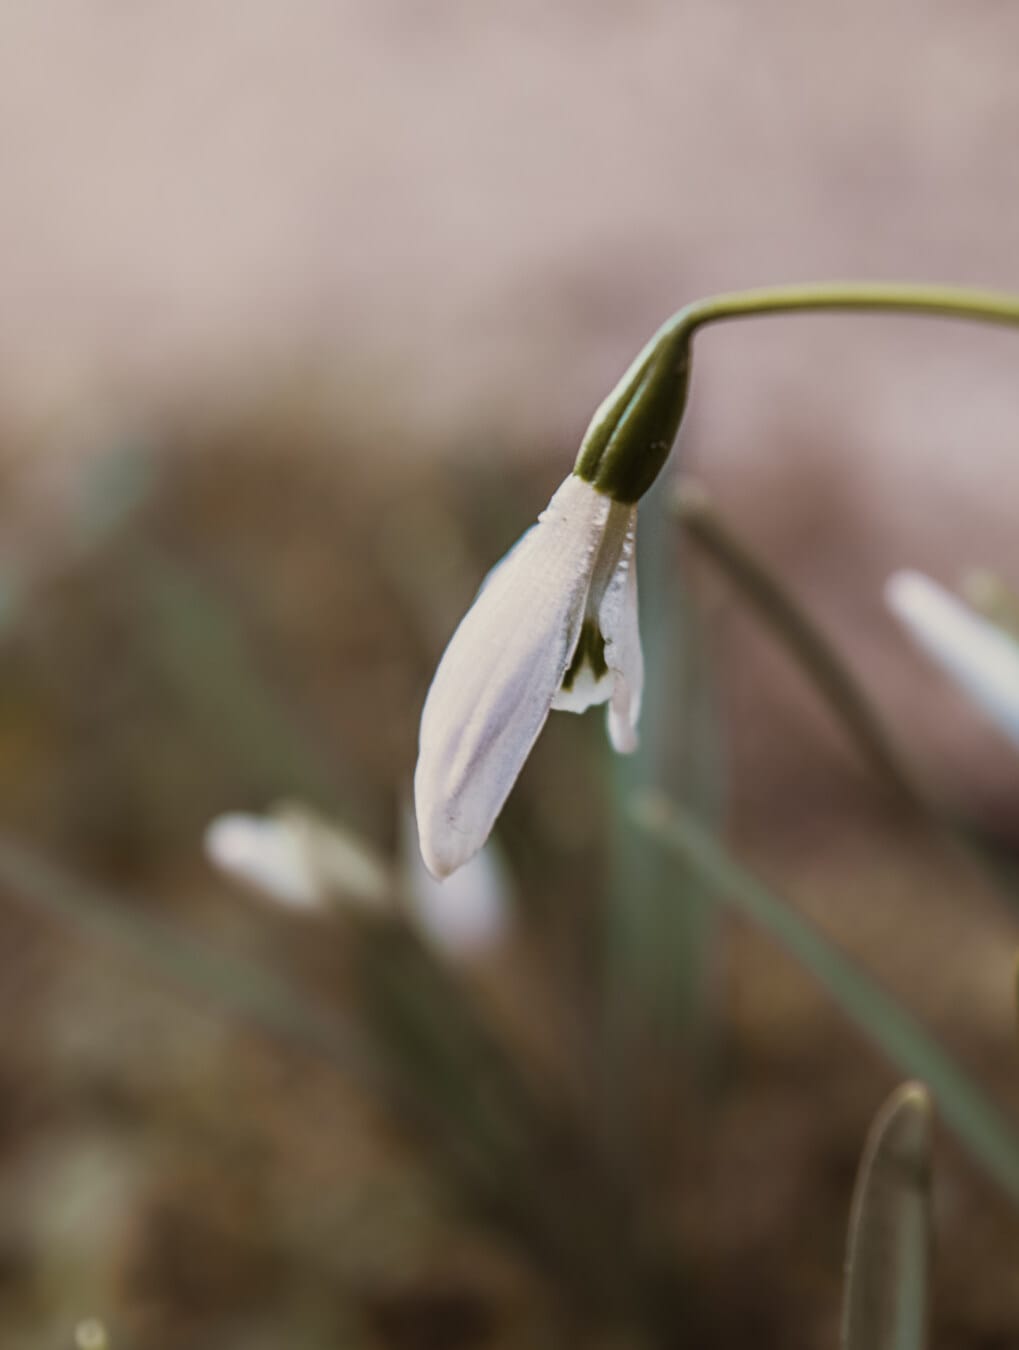 close-up, focus, white flower, spring, nature, outdoors, flower, blur, bright, upclose